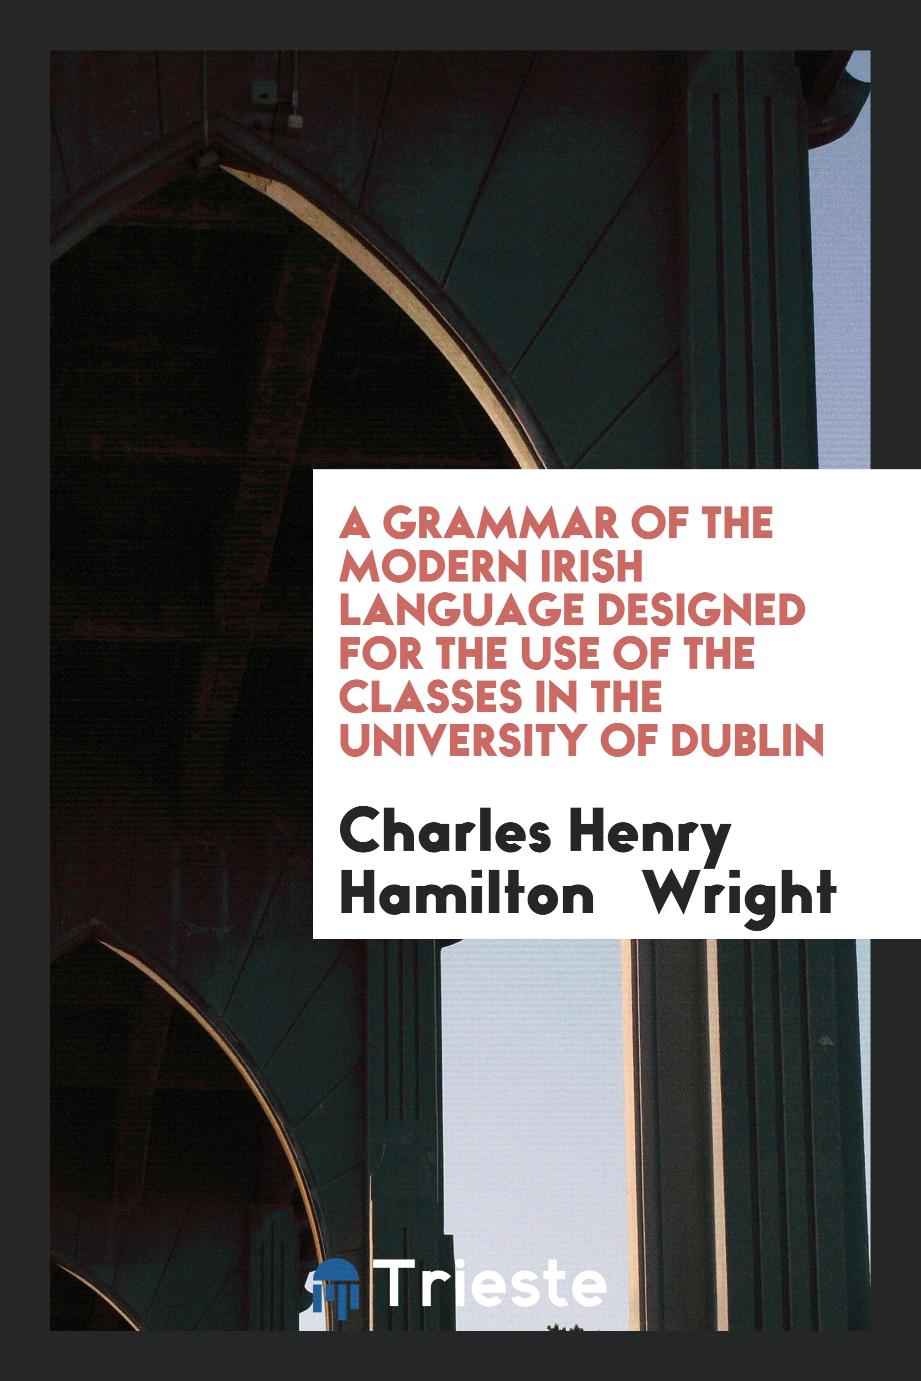 A grammar of the modern Irish language designed for the use of the classes in the University of Dublin